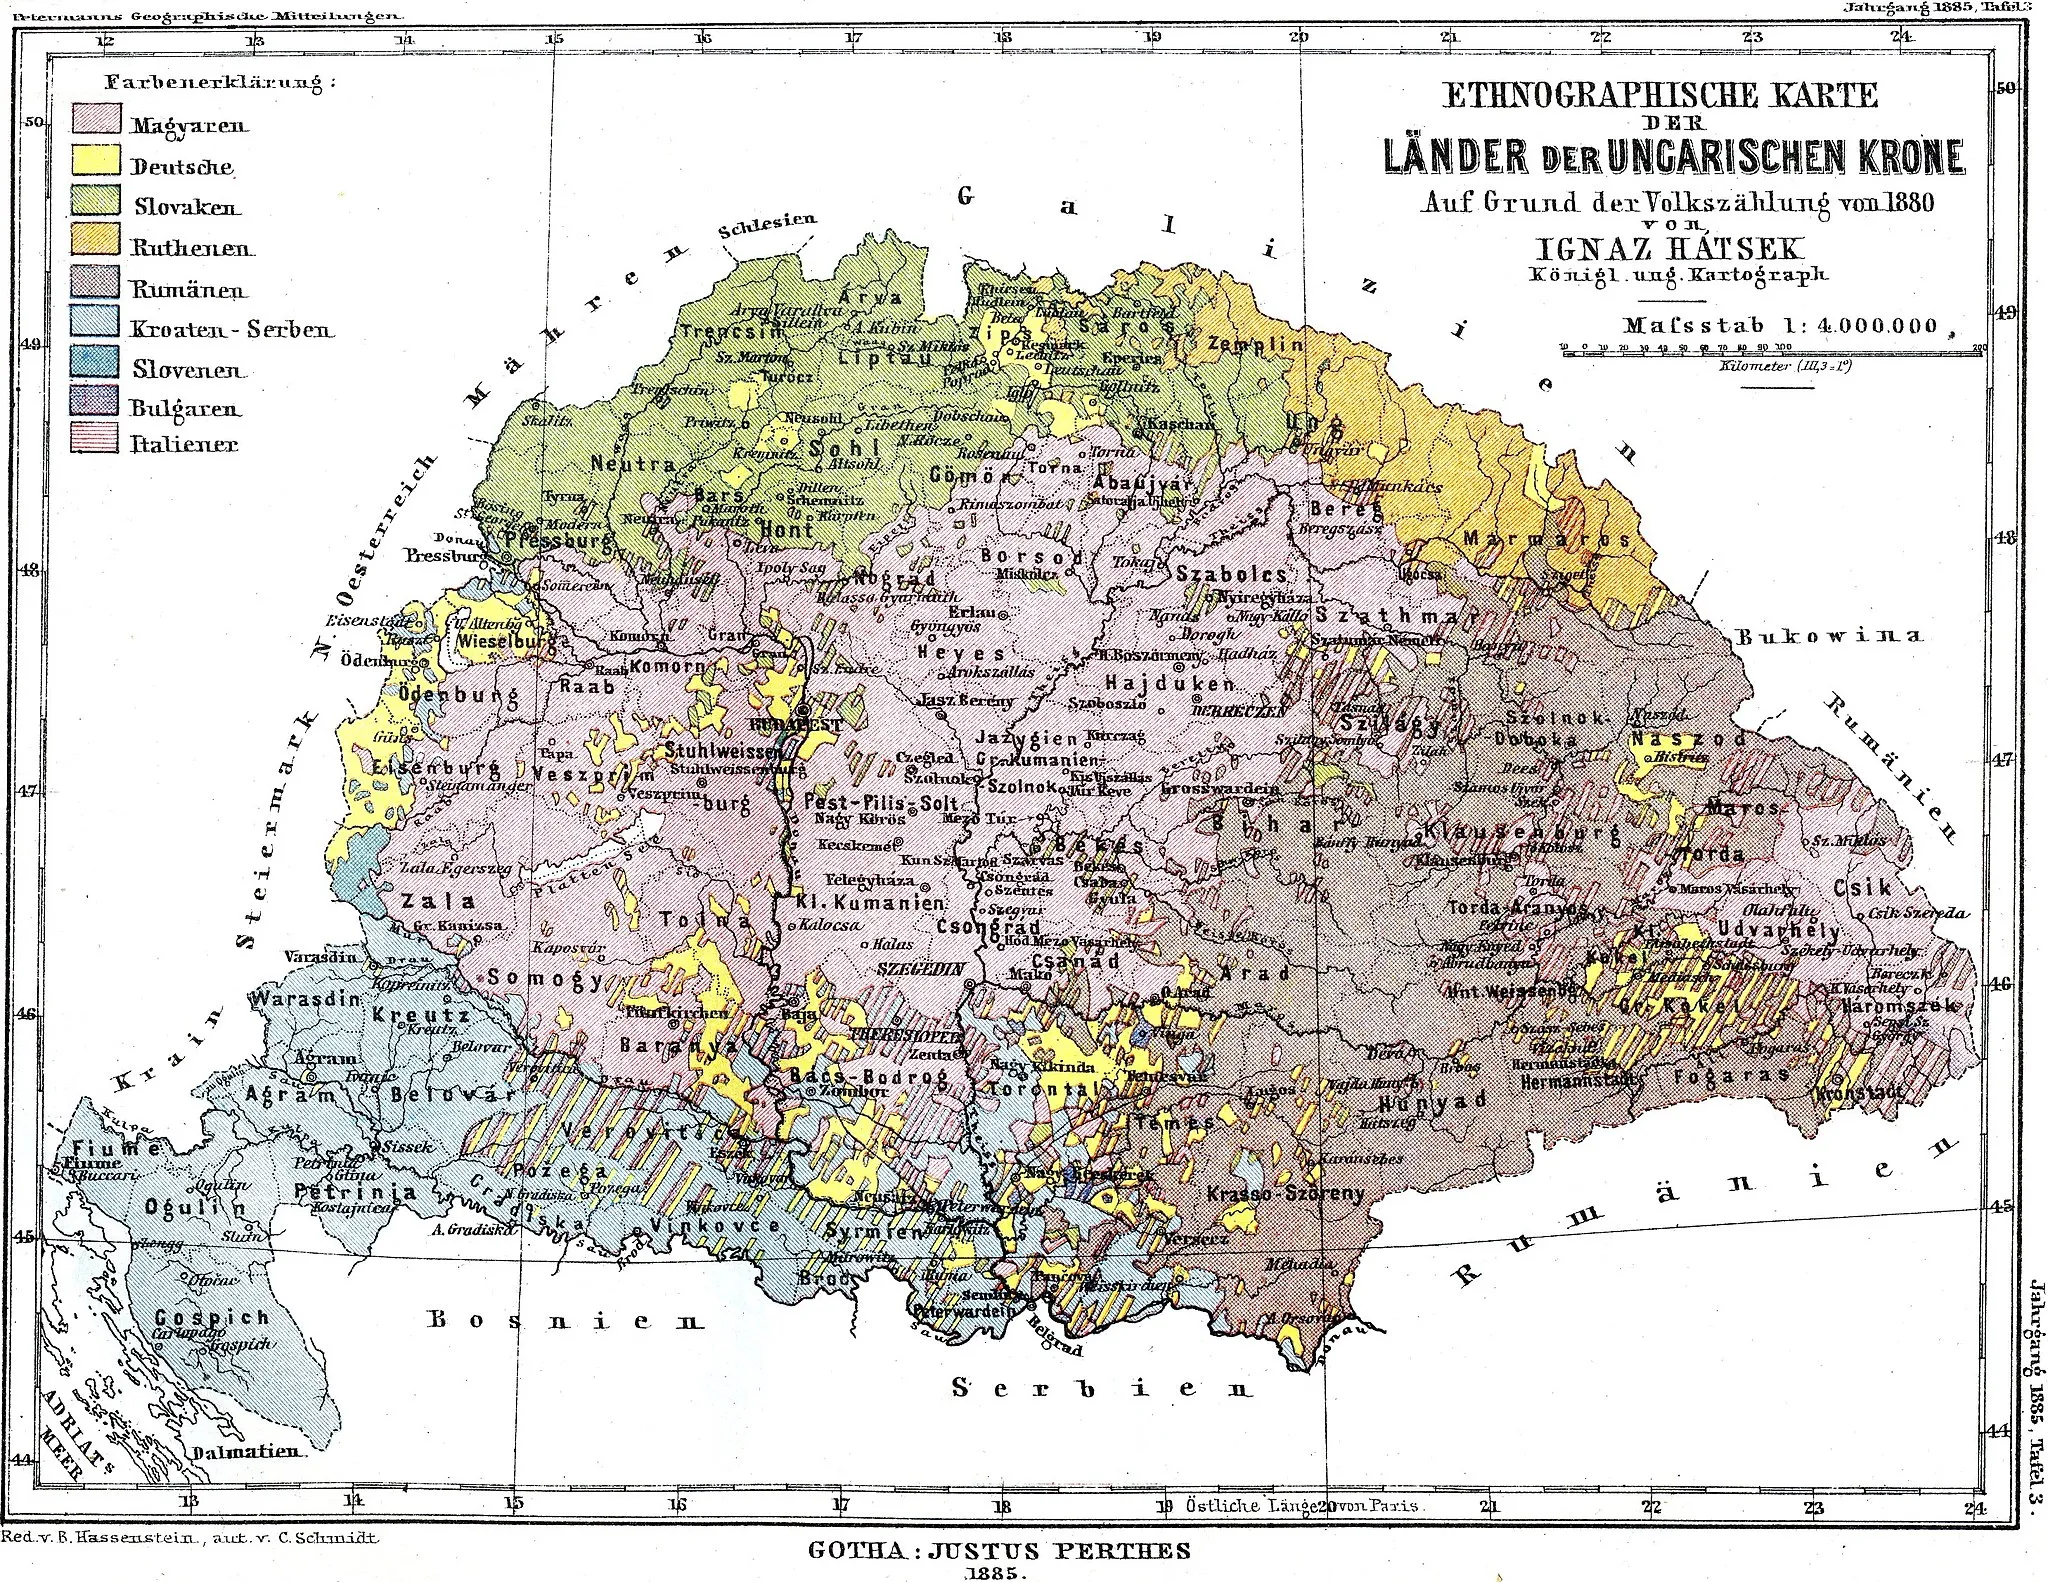 Photo showing: Ethnic groups of the Hungarian Kingdom according to the 1880-census